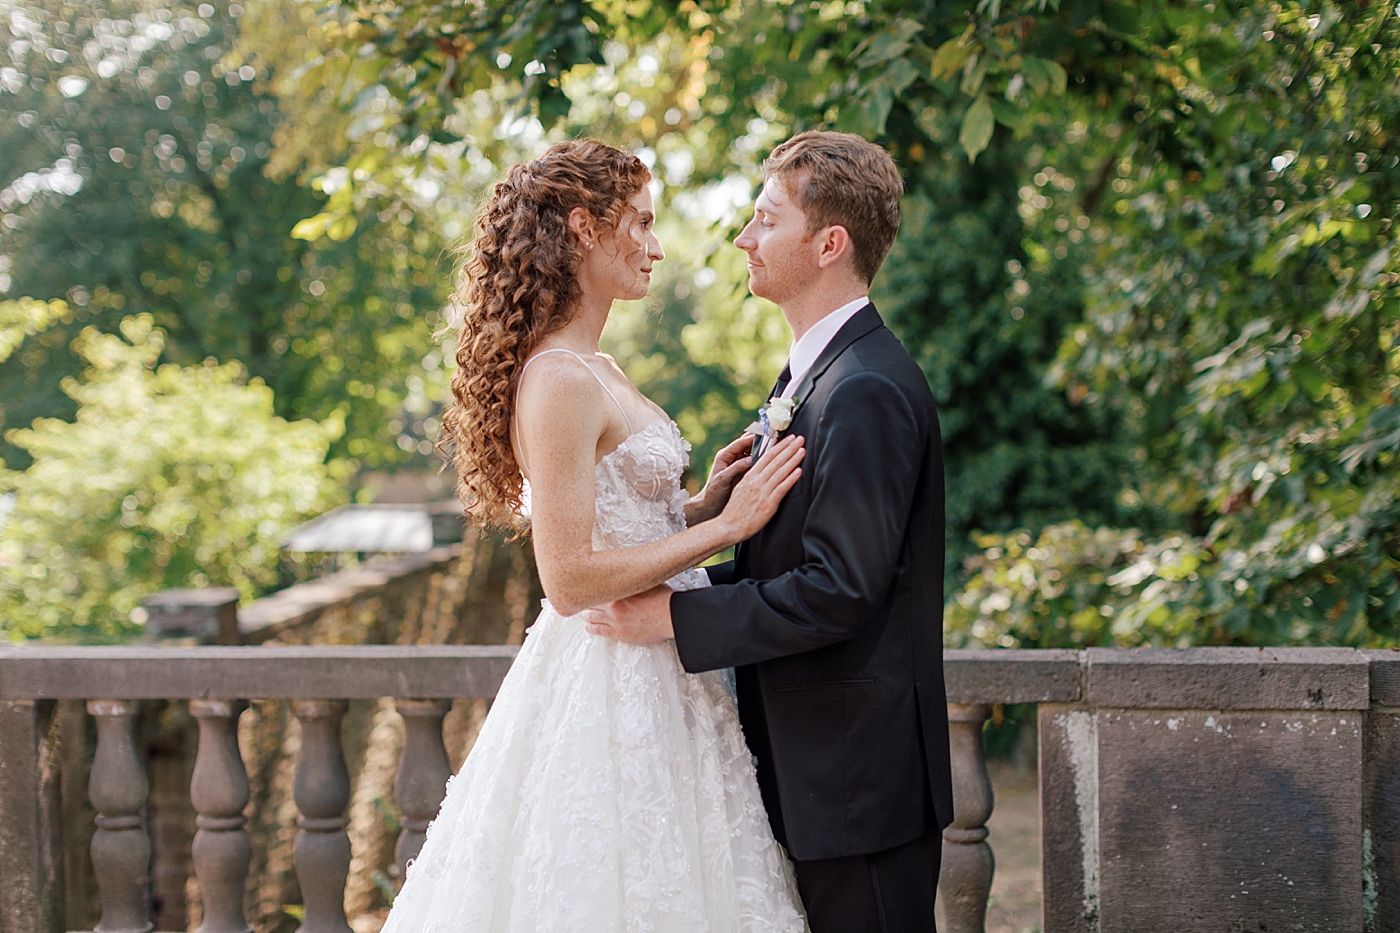 Bride and groom embracing during Tyler Gardens Wedding | Image by Hope Helmuth Photography